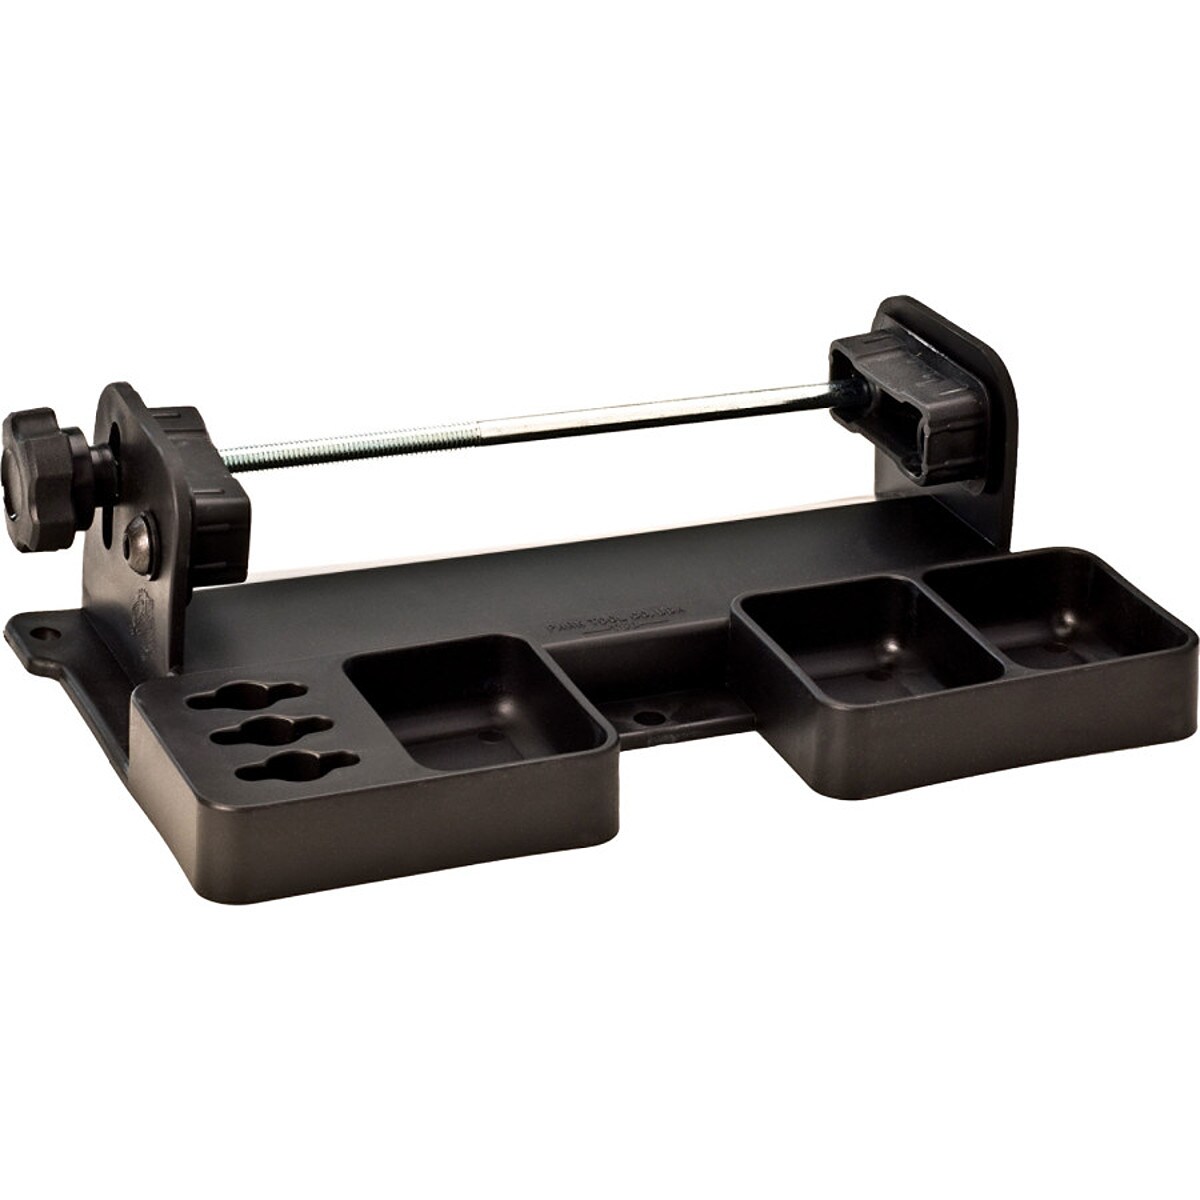 Park Tool Truing Stand Tilting Base For TS 2